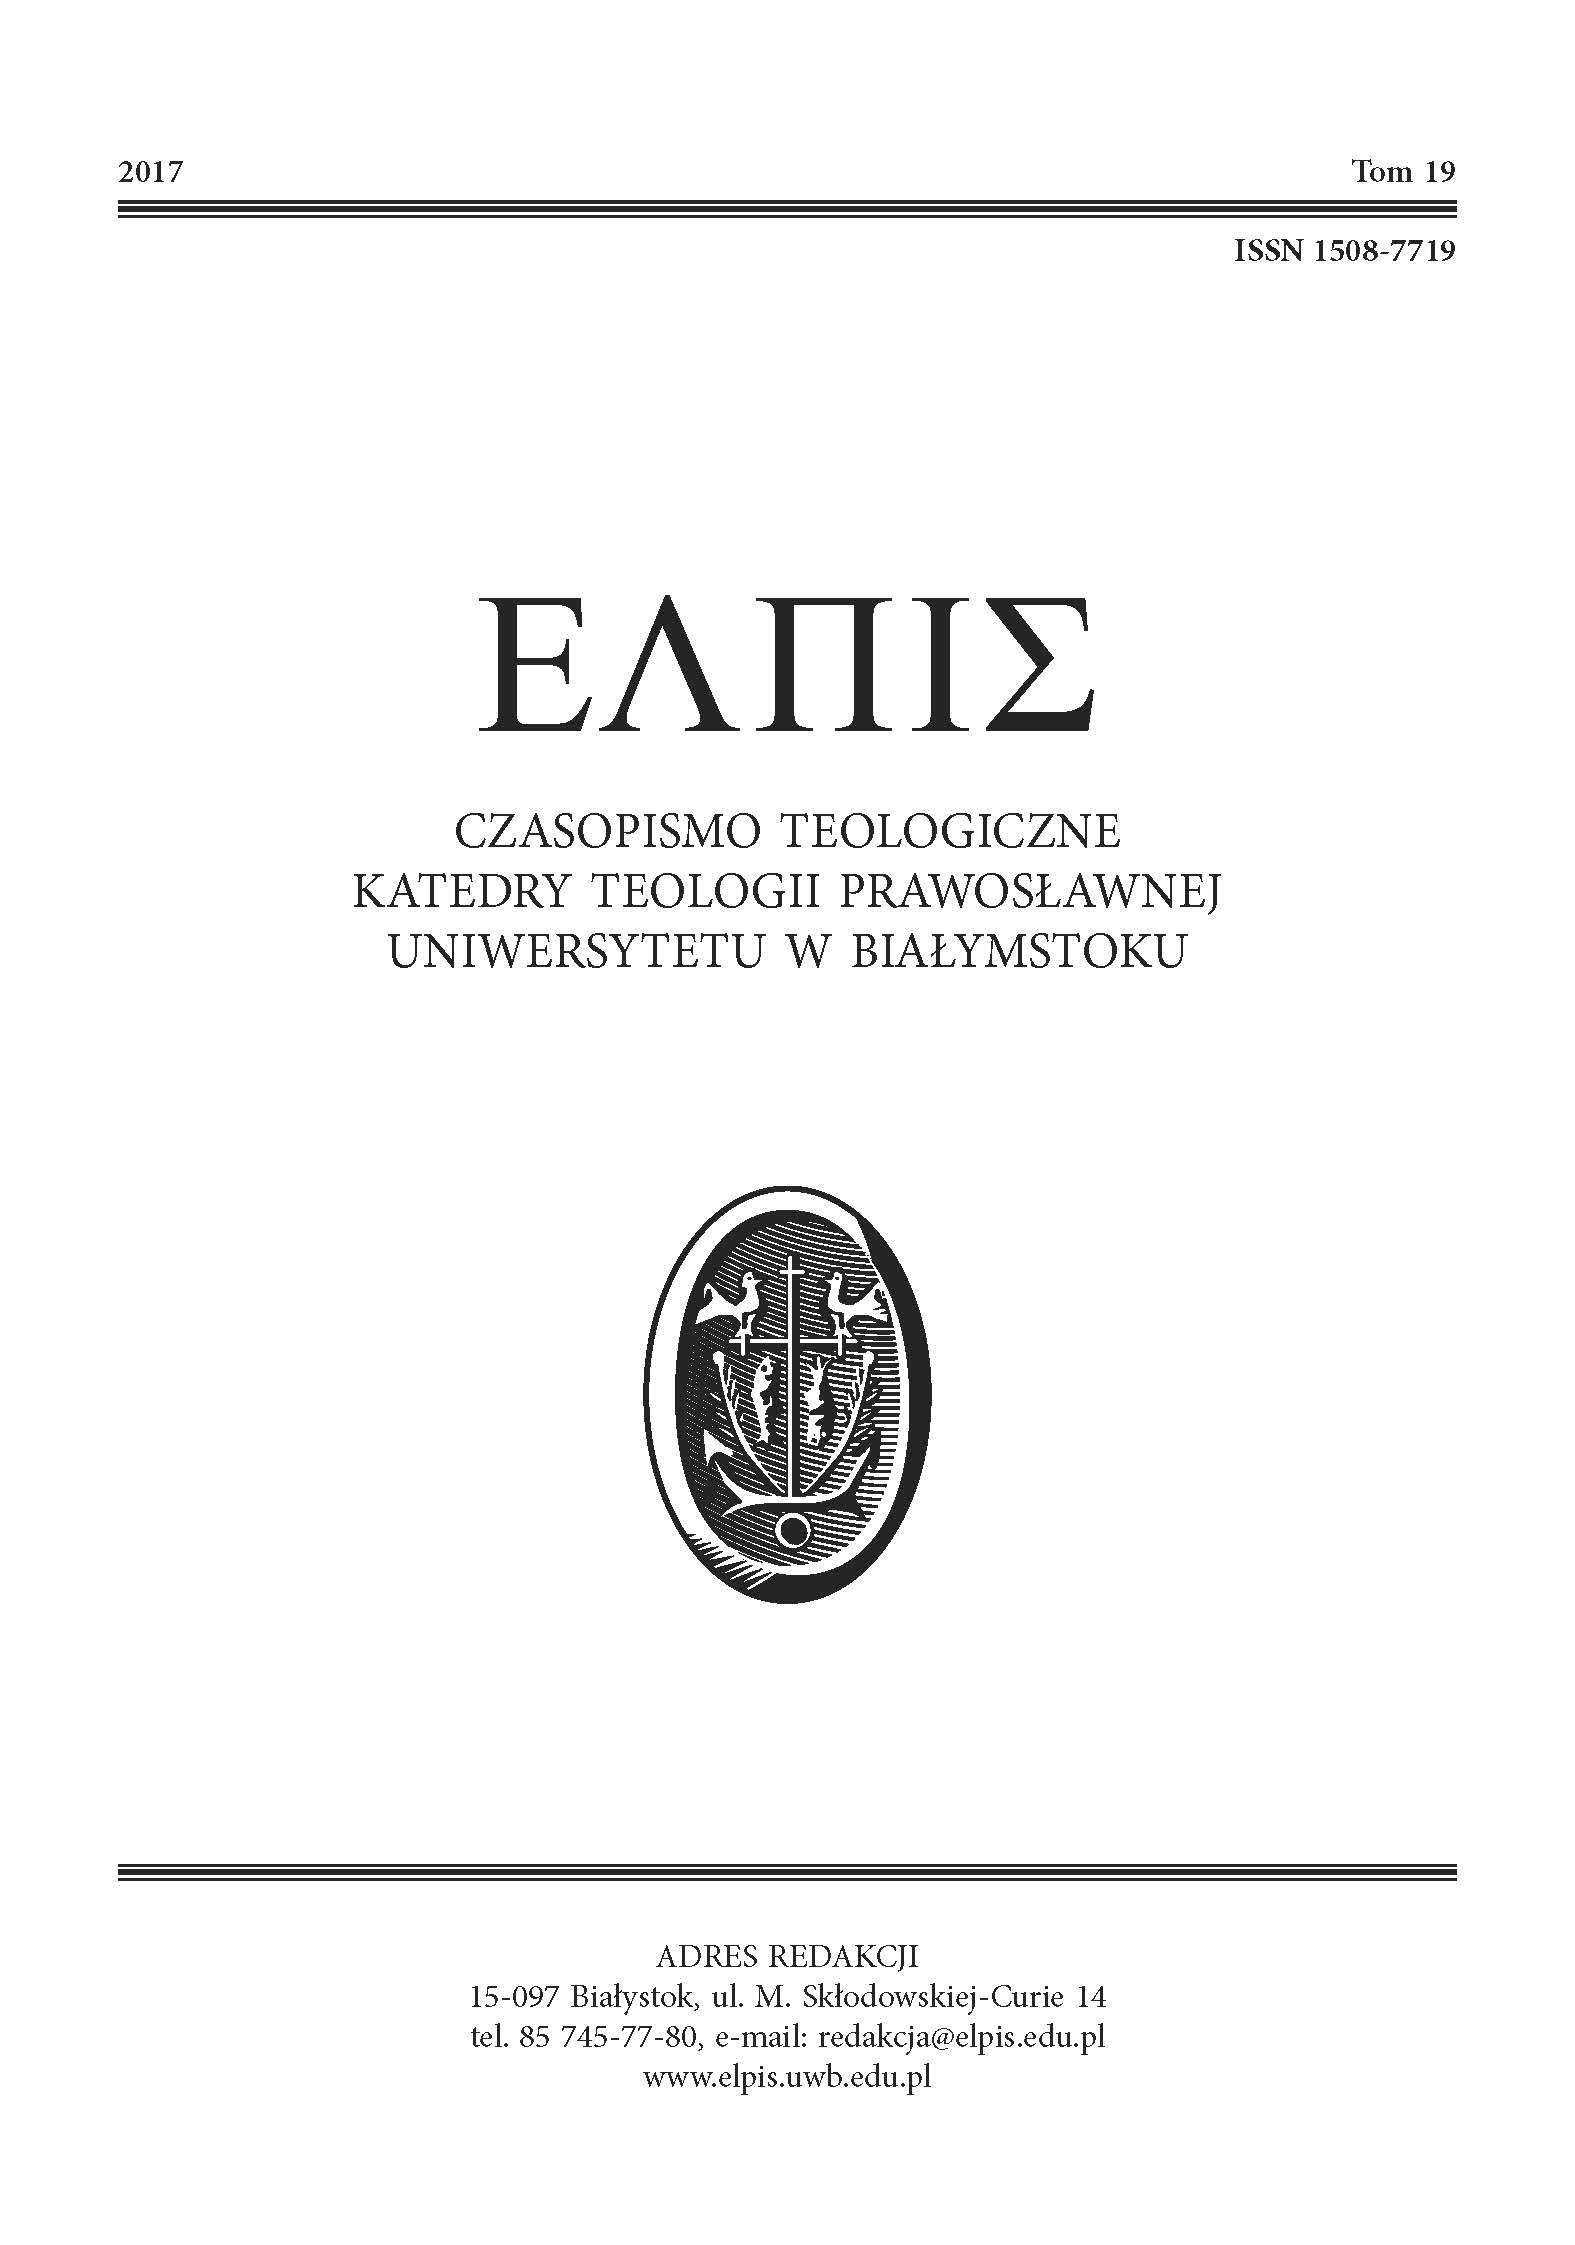 Discussions of patriarchy the symbol of the end of the synodal period in the history of the Russian Orthodox Church of beginnings of the 20th century Cover Image